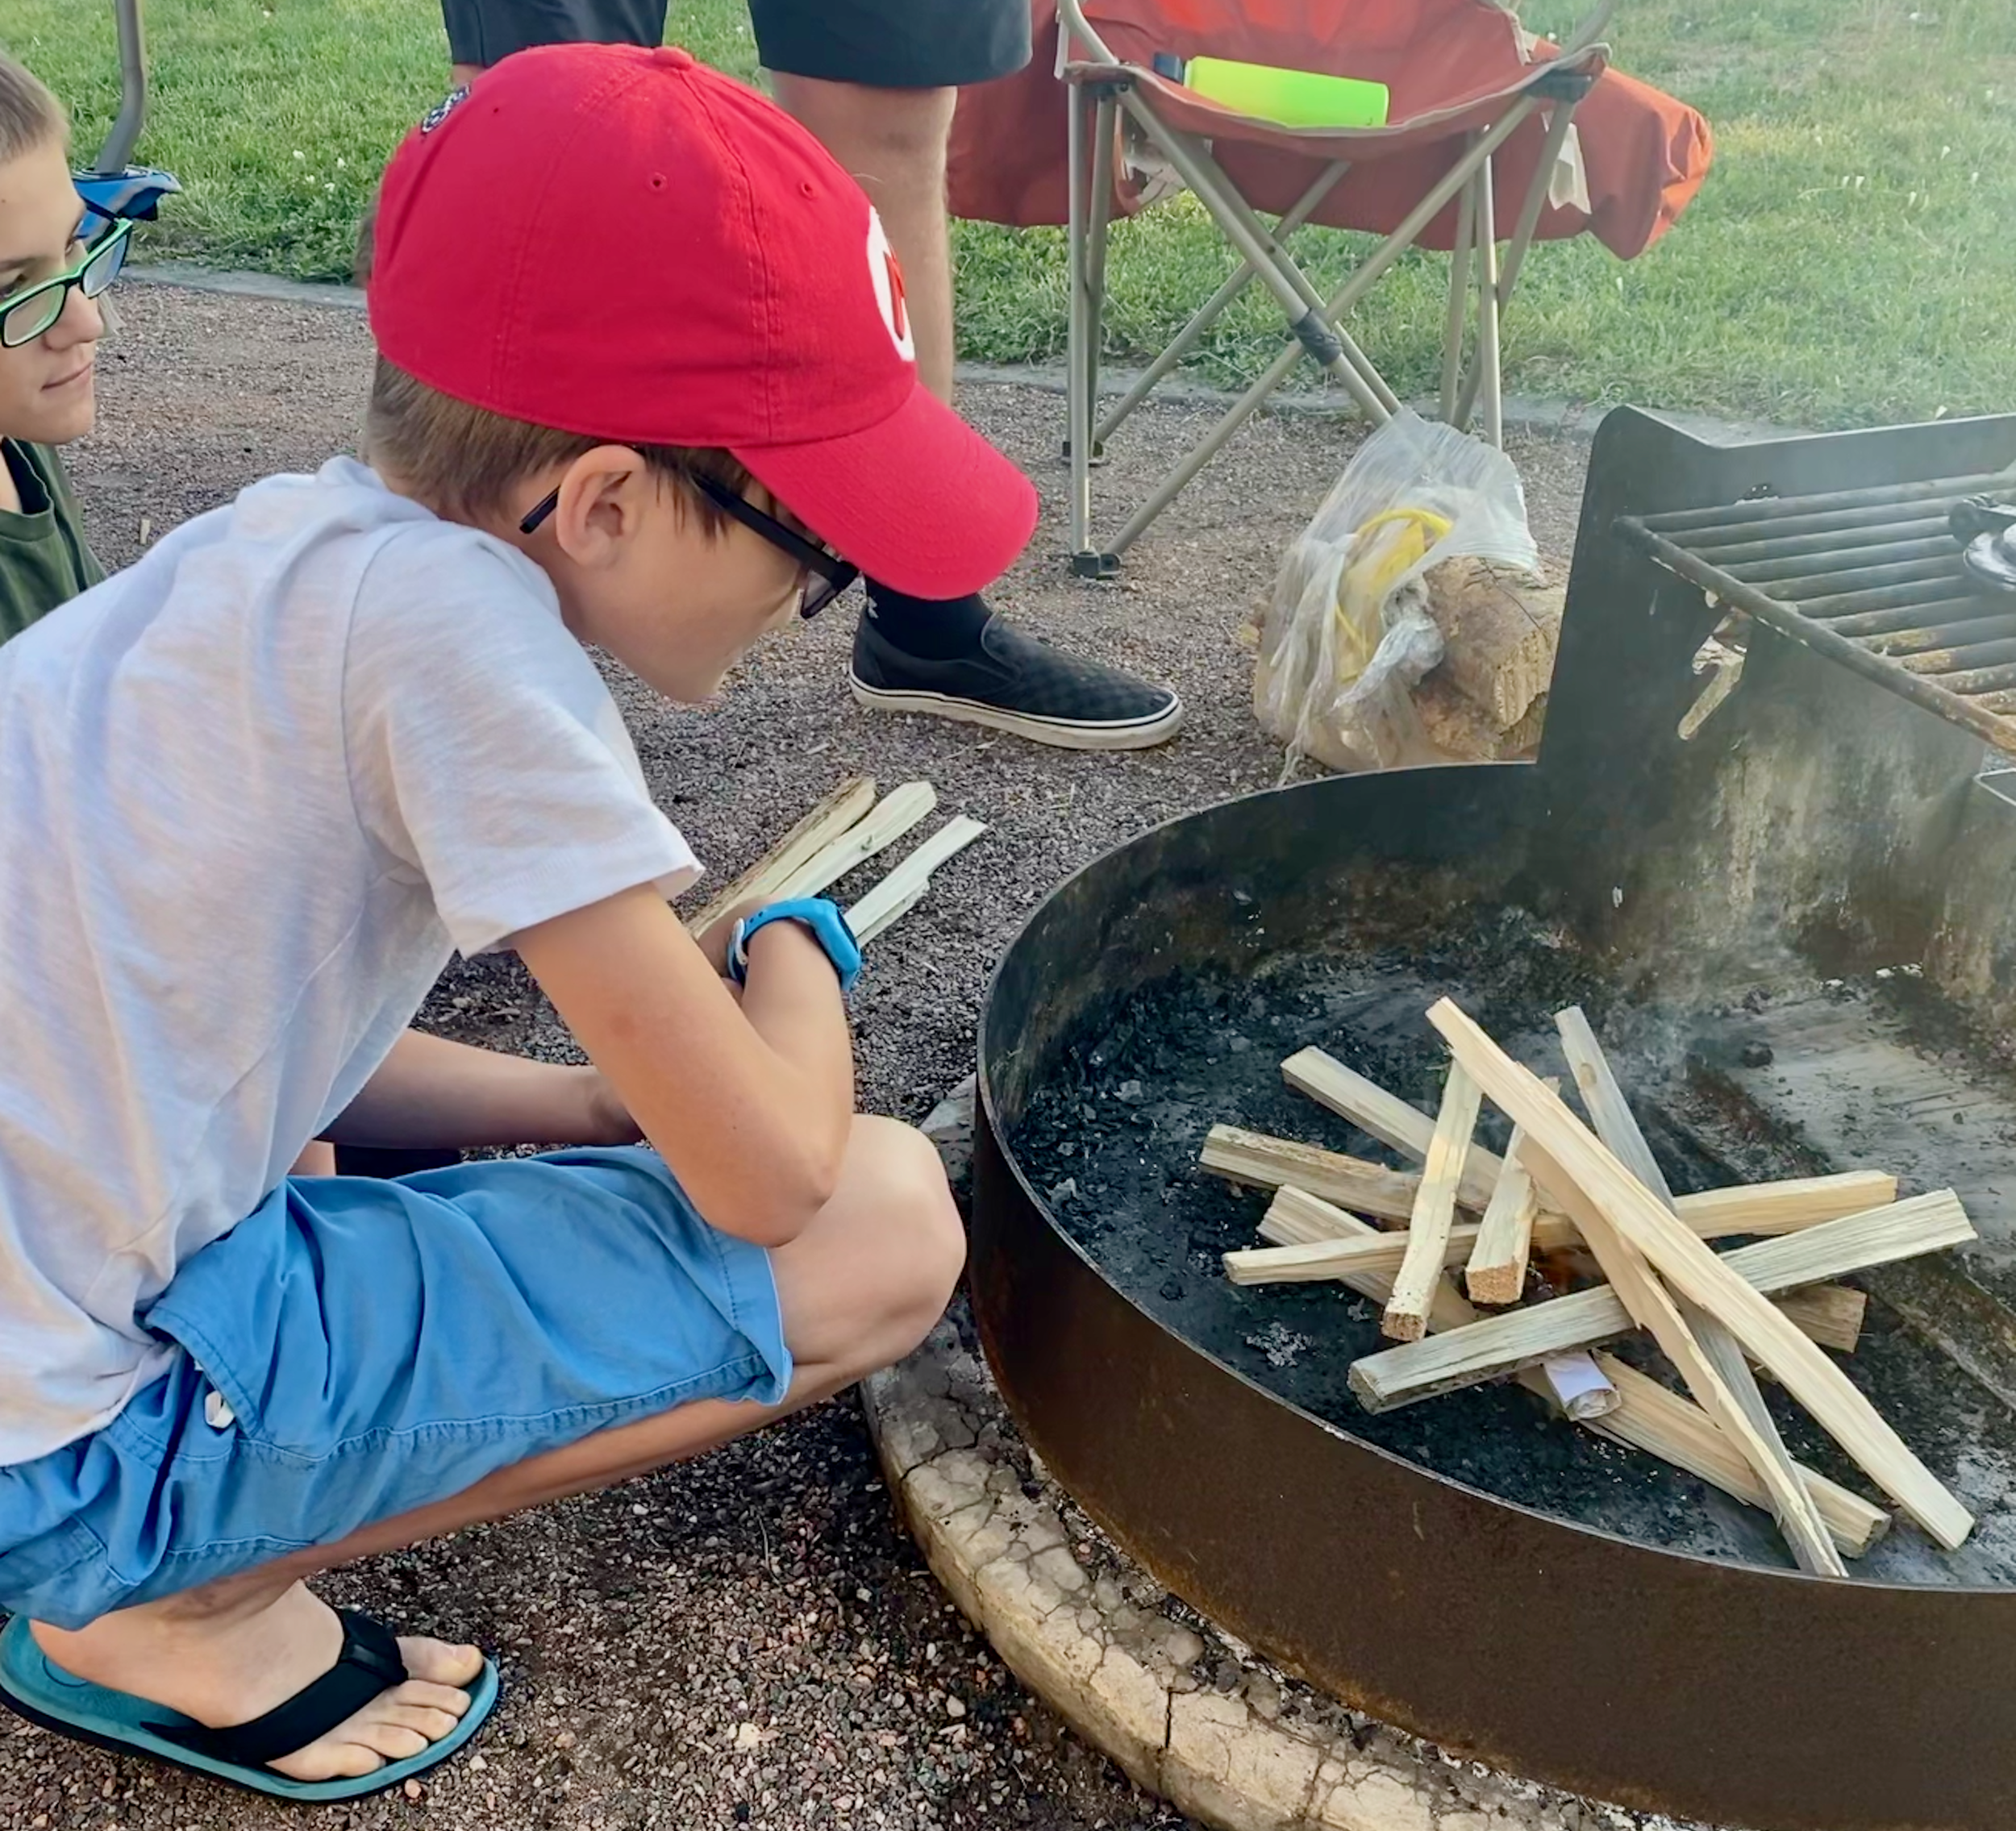 Building Bonds and Memories: The Benefits of Camping for Families